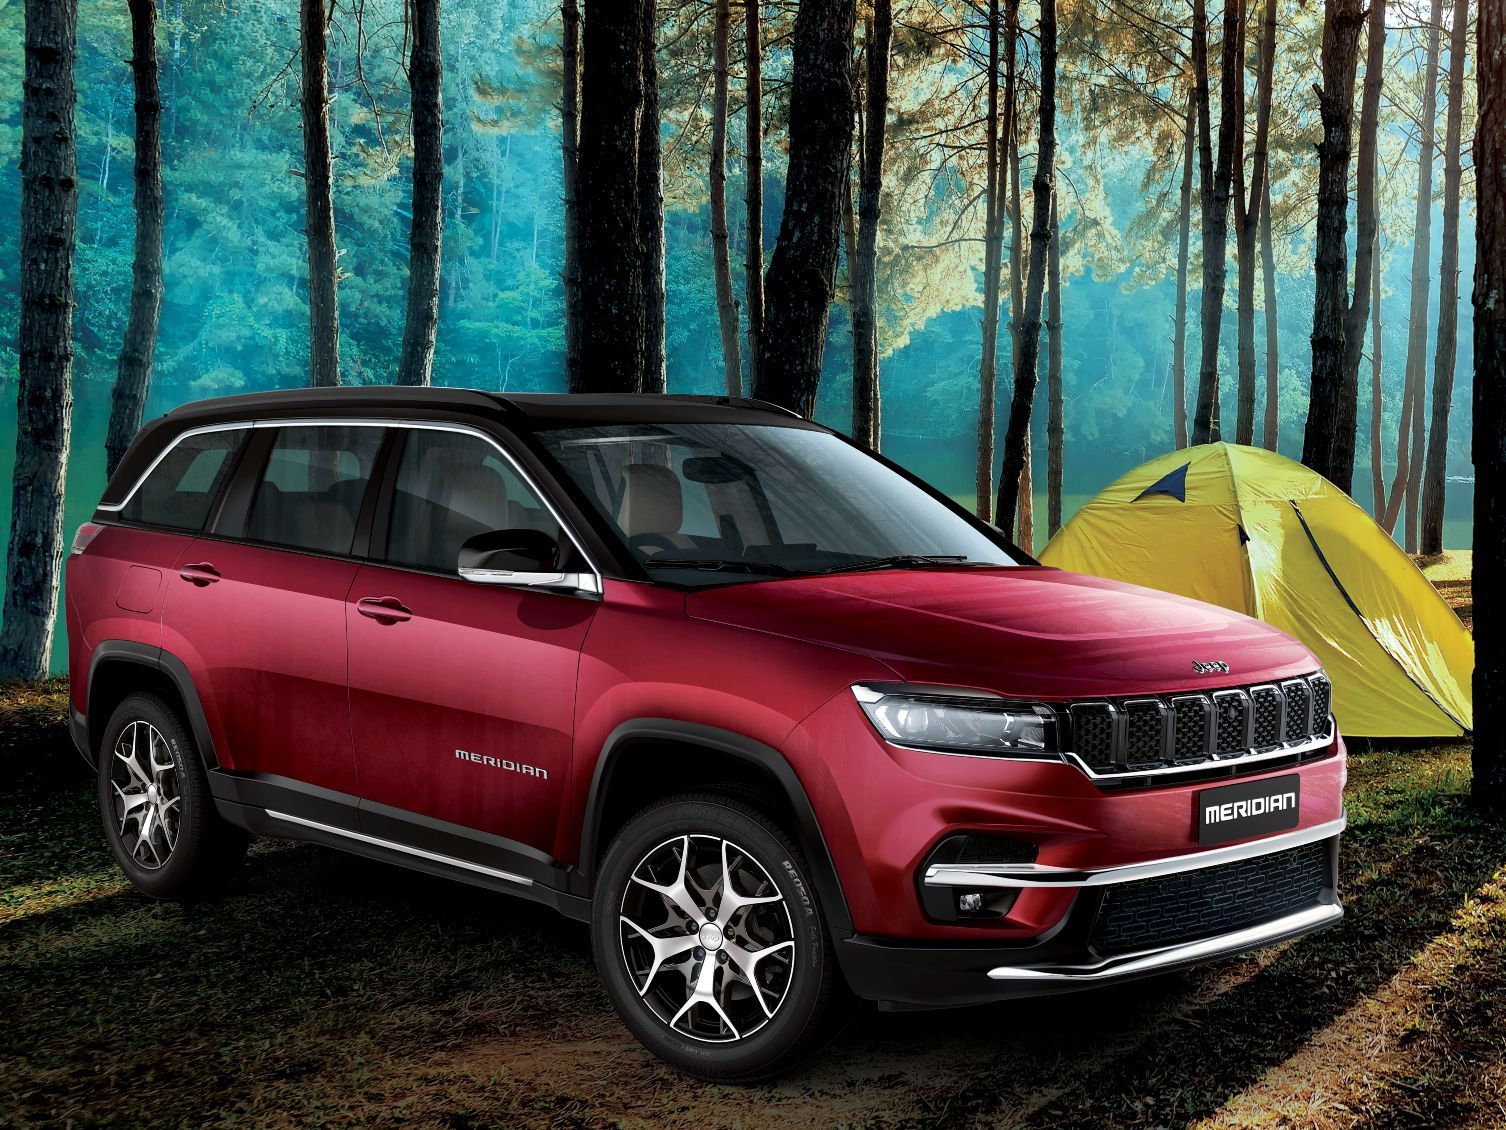 Jeep Meridian Breaks Cover Ahead Of Mid-2022 Launch, To Rival